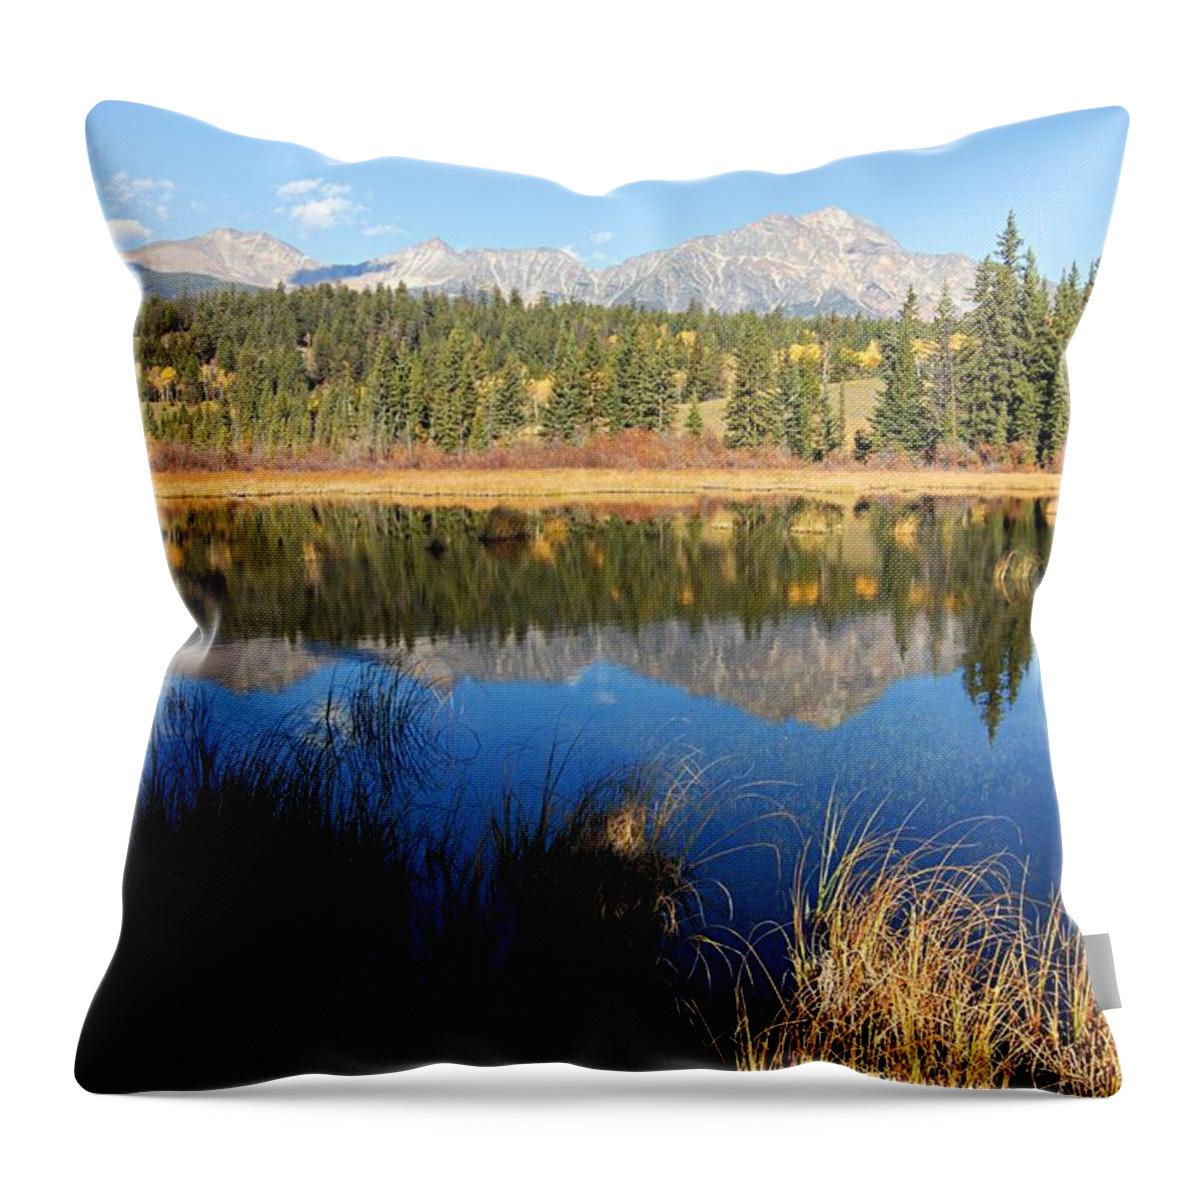 Pyramid Mountain Throw Pillow featuring the photograph Beaver Pond and Pyramid Mountain by Larry Ricker